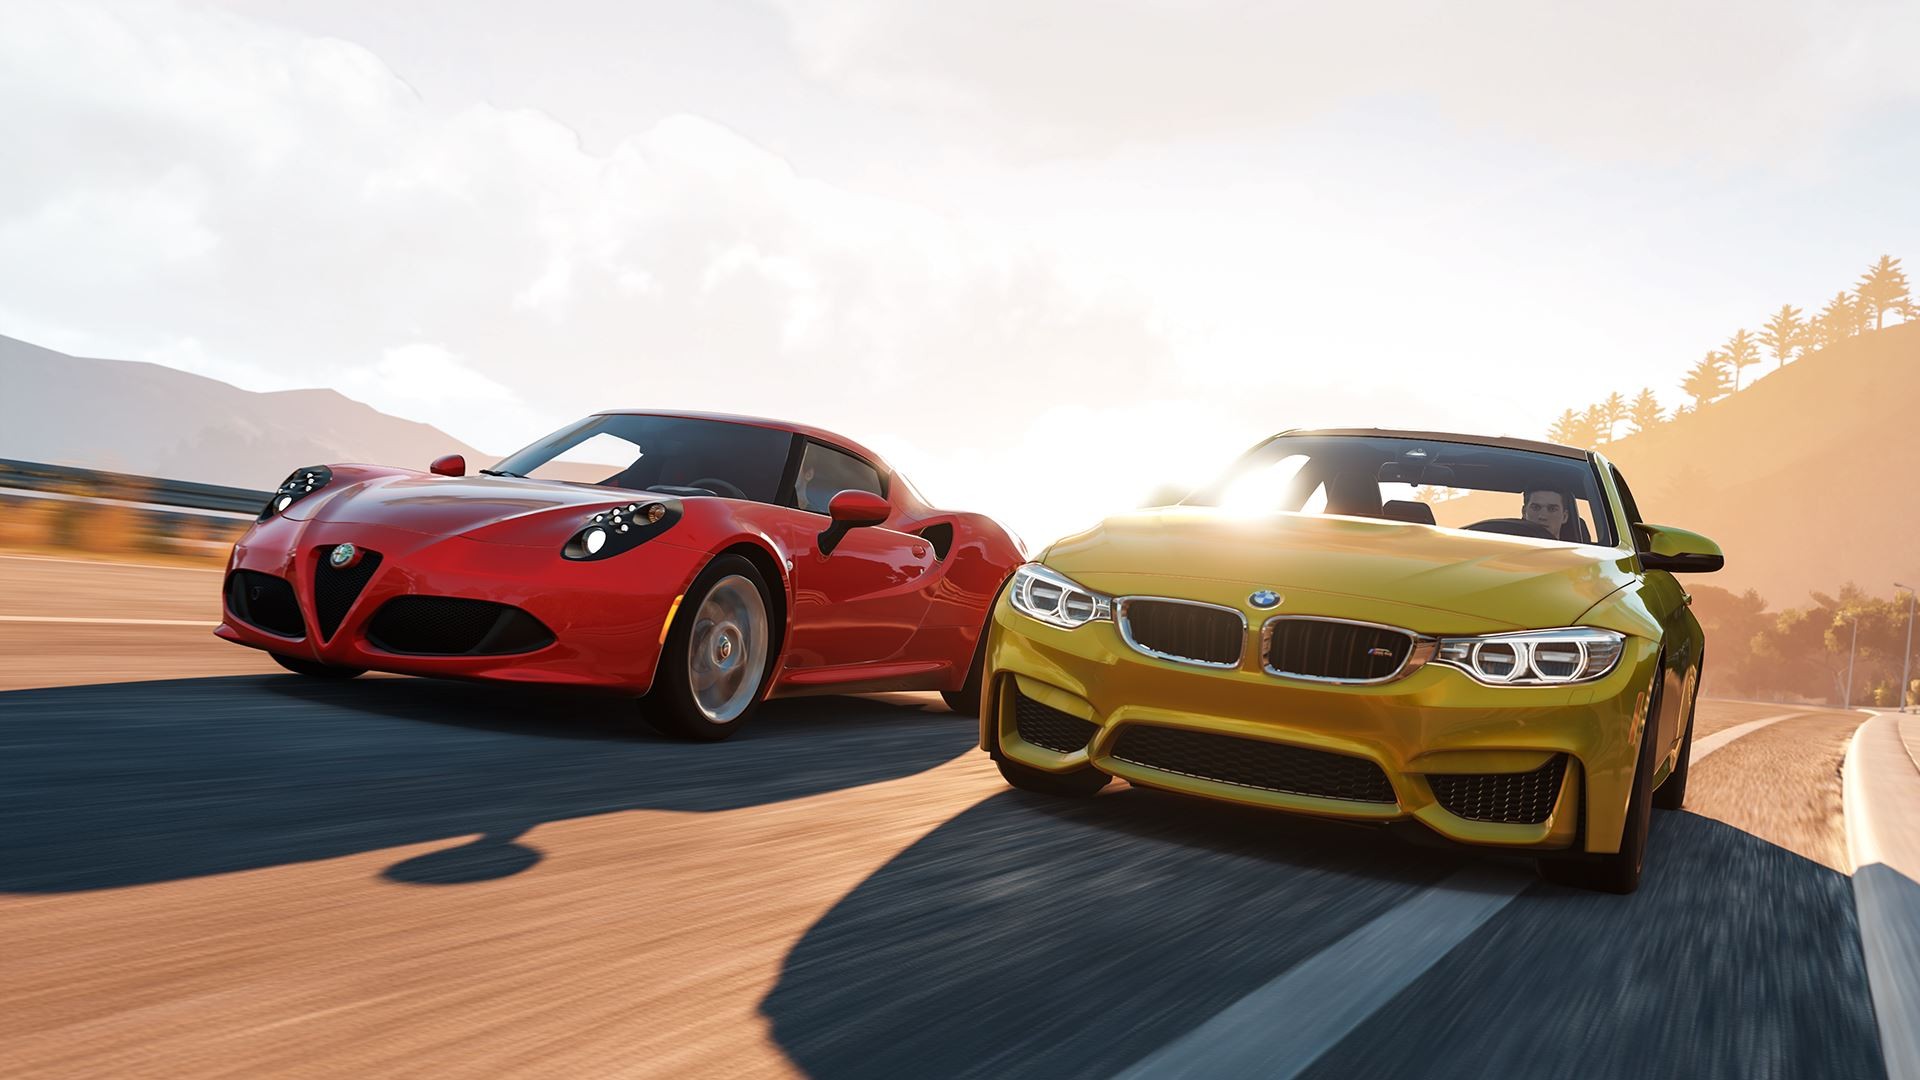 General 1920x1080 car racing yellow cars red cars vehicle road video games